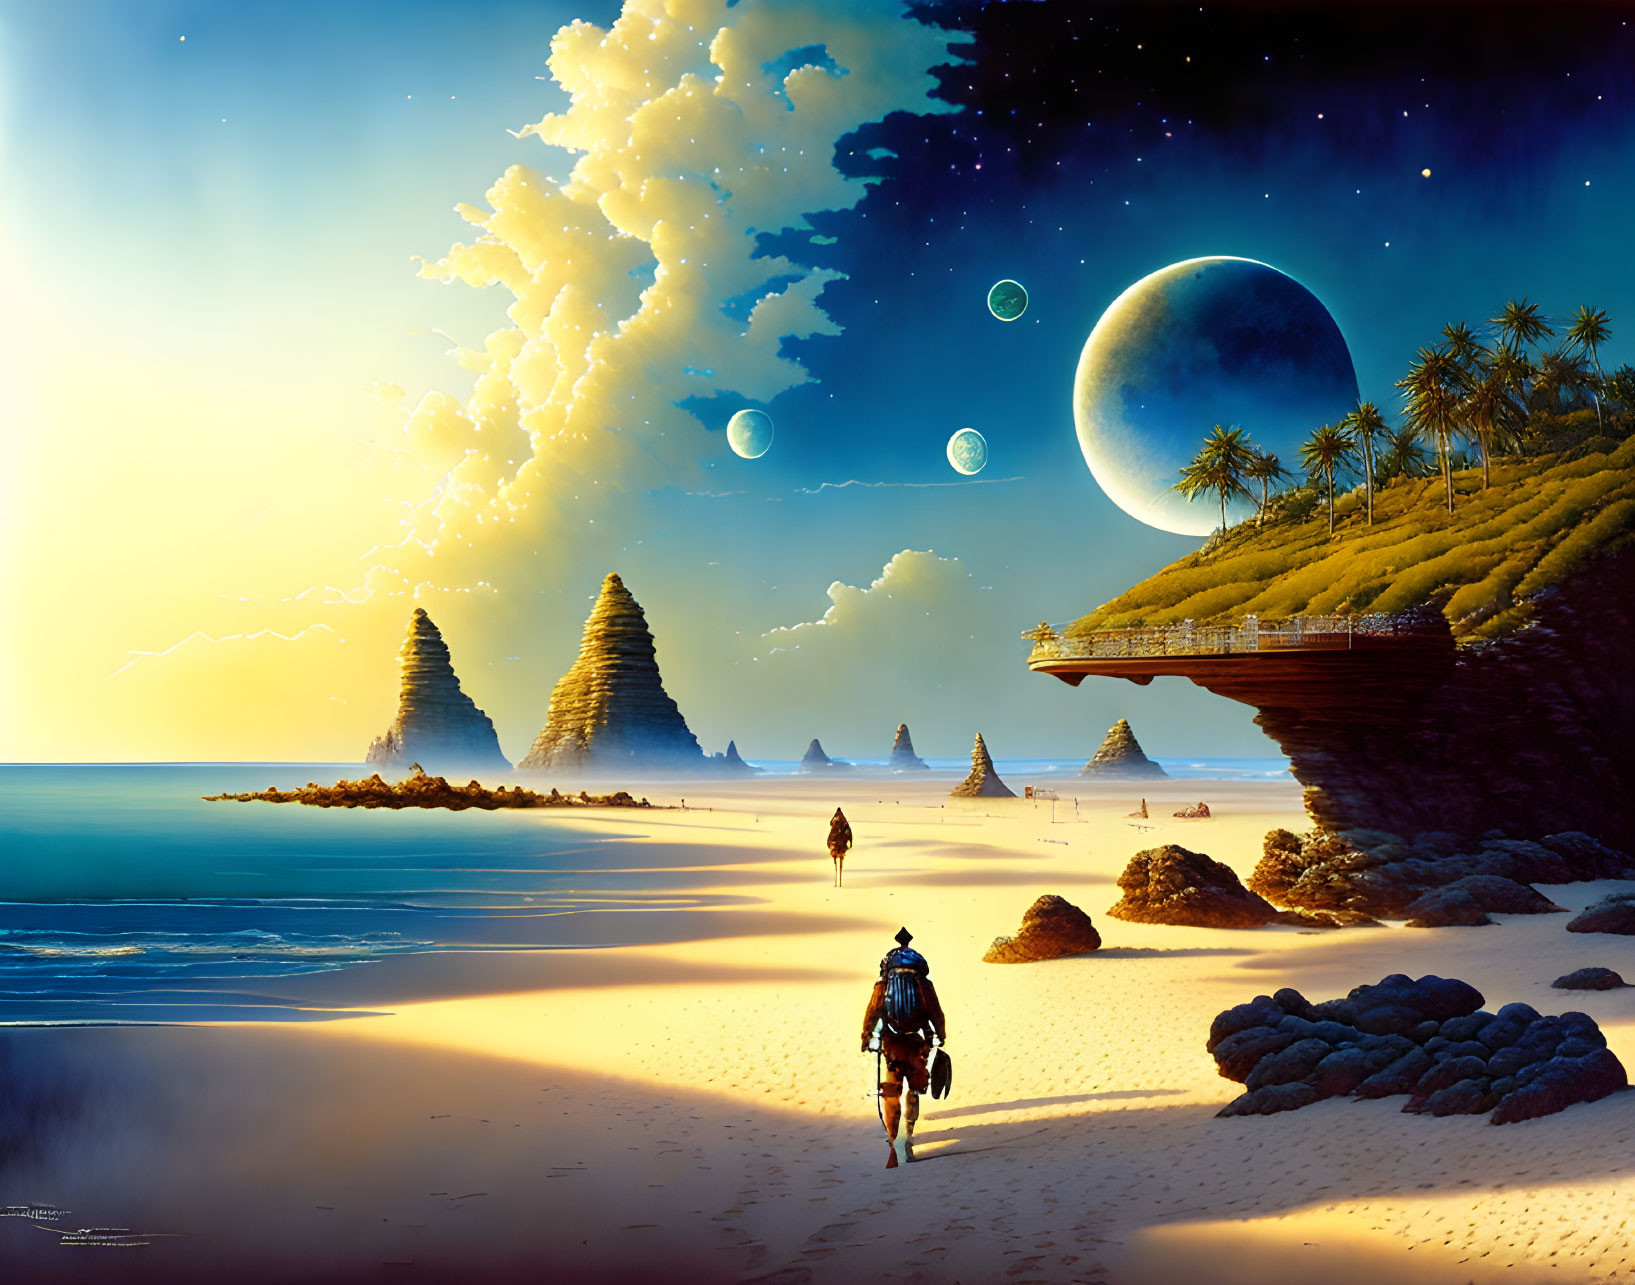 Surreal twilight beach landscape with person, camel, rock formations, greenery, and multiple moons